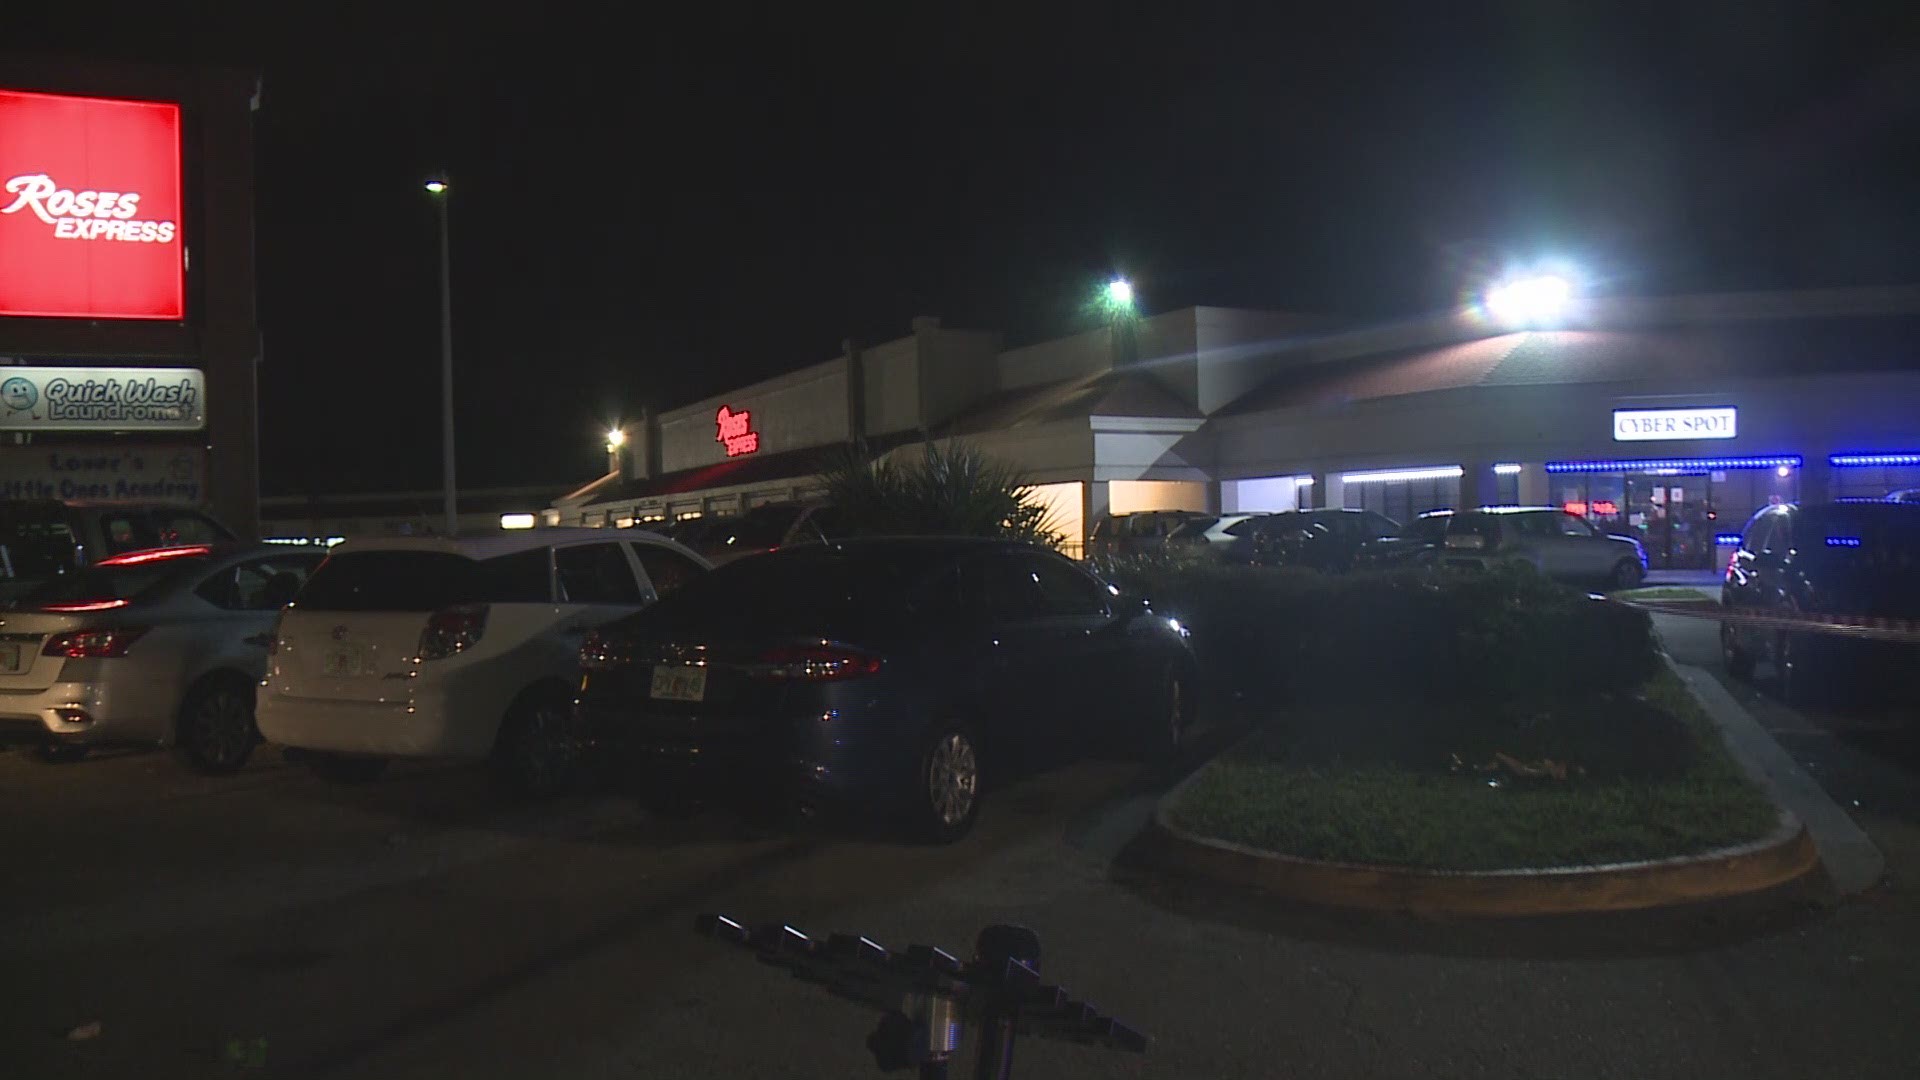 Police say the girl was seated in a car with her father while they waited for her mother to finish up at work at one of the restaurants. She was then struck in the crossfire of a shootout.